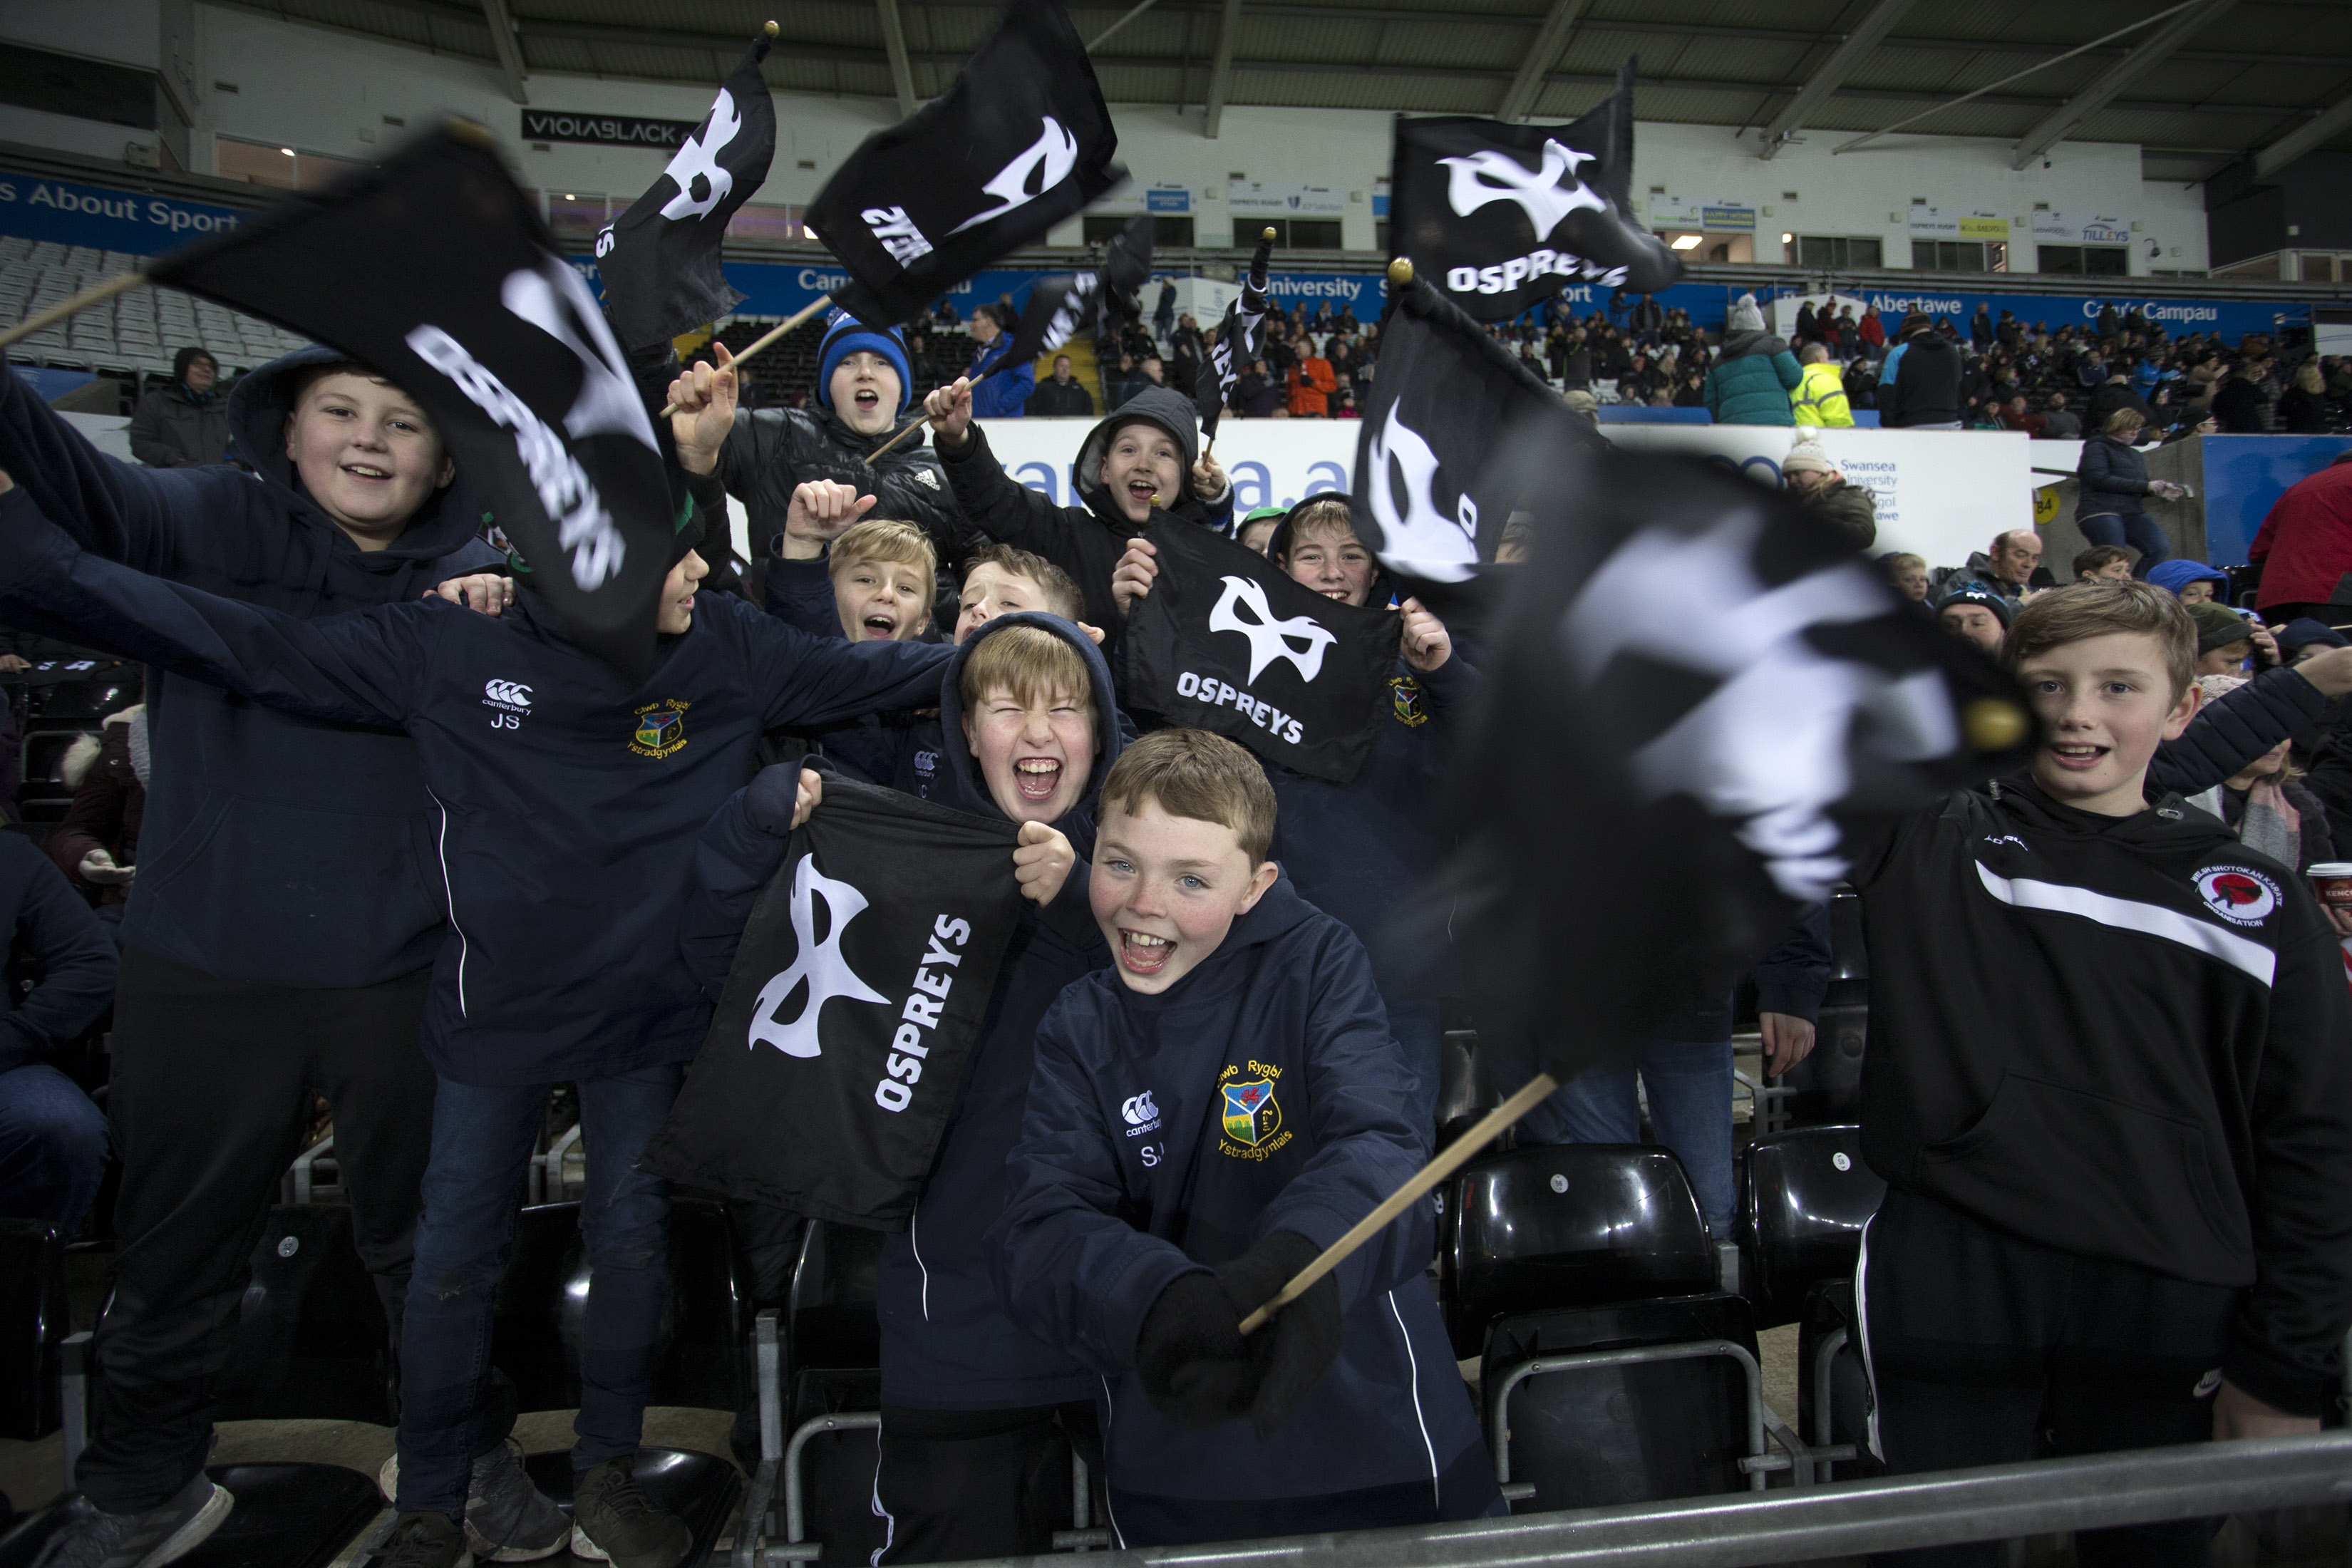 Young ospreys fans waving flags